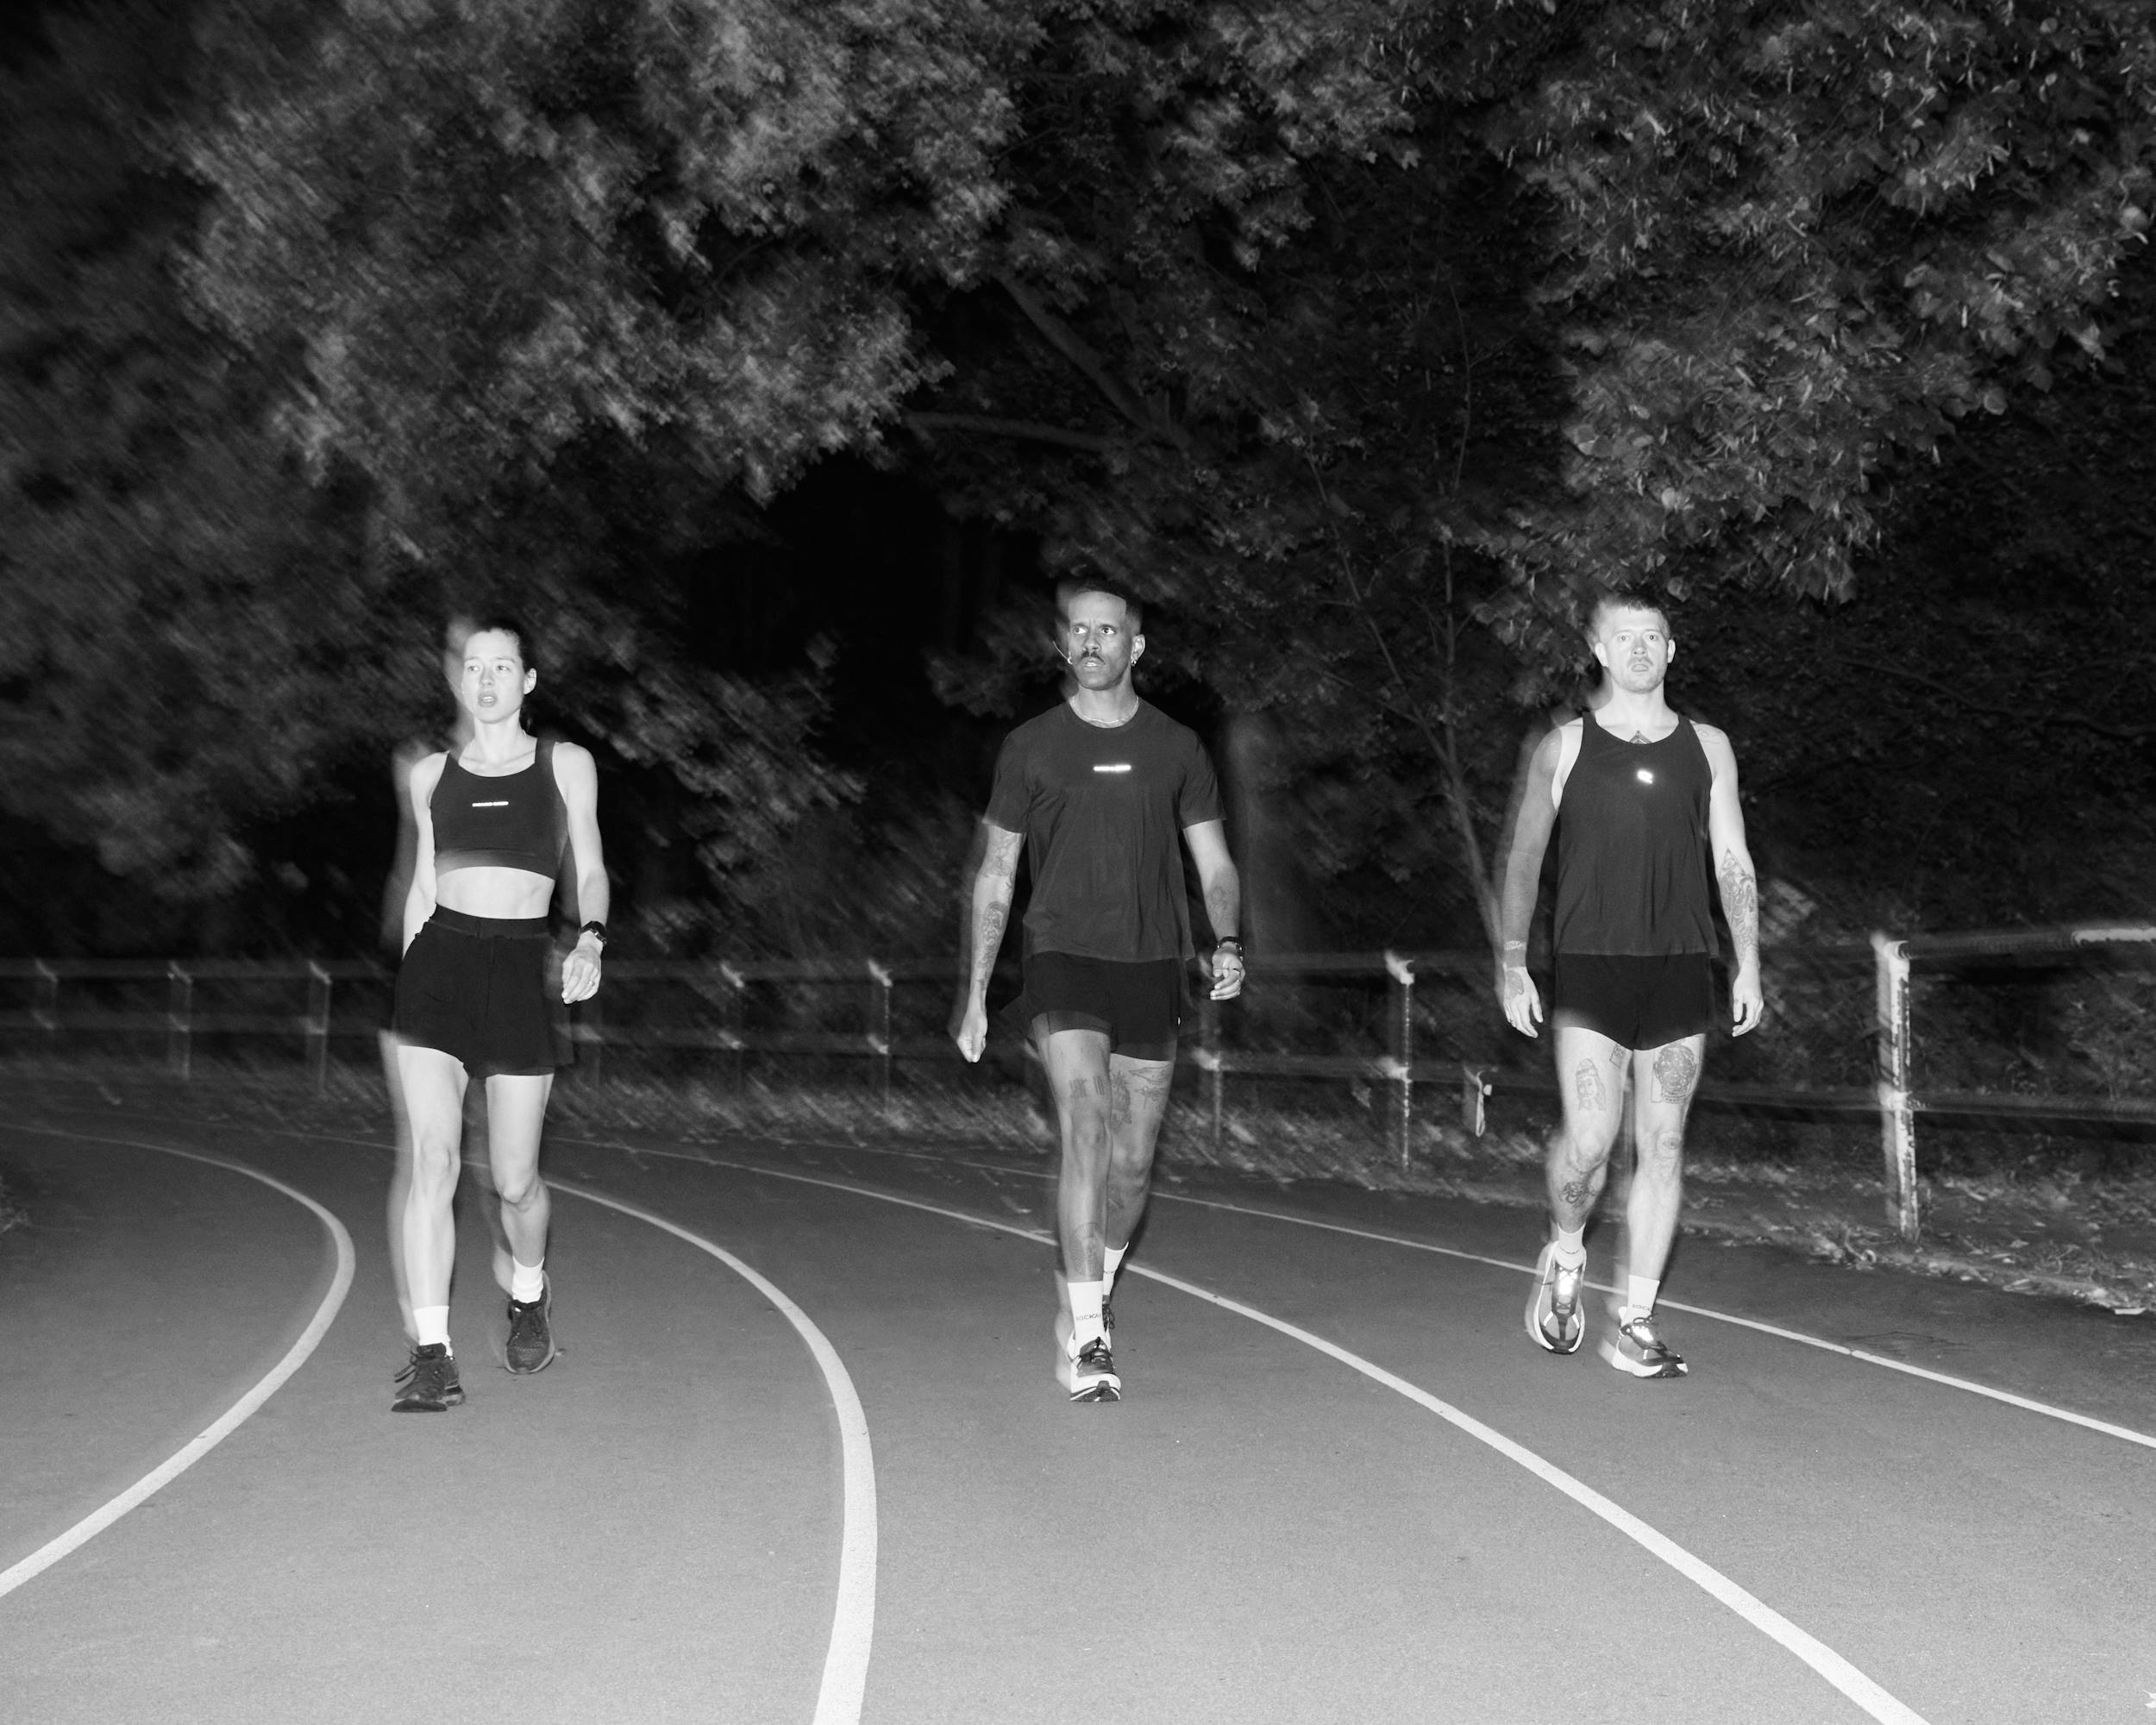 BERLIN NIGHT RUN - RUN KIT CORE COLLECTION - COLLECTION 02 - Photographed by Jack Hare